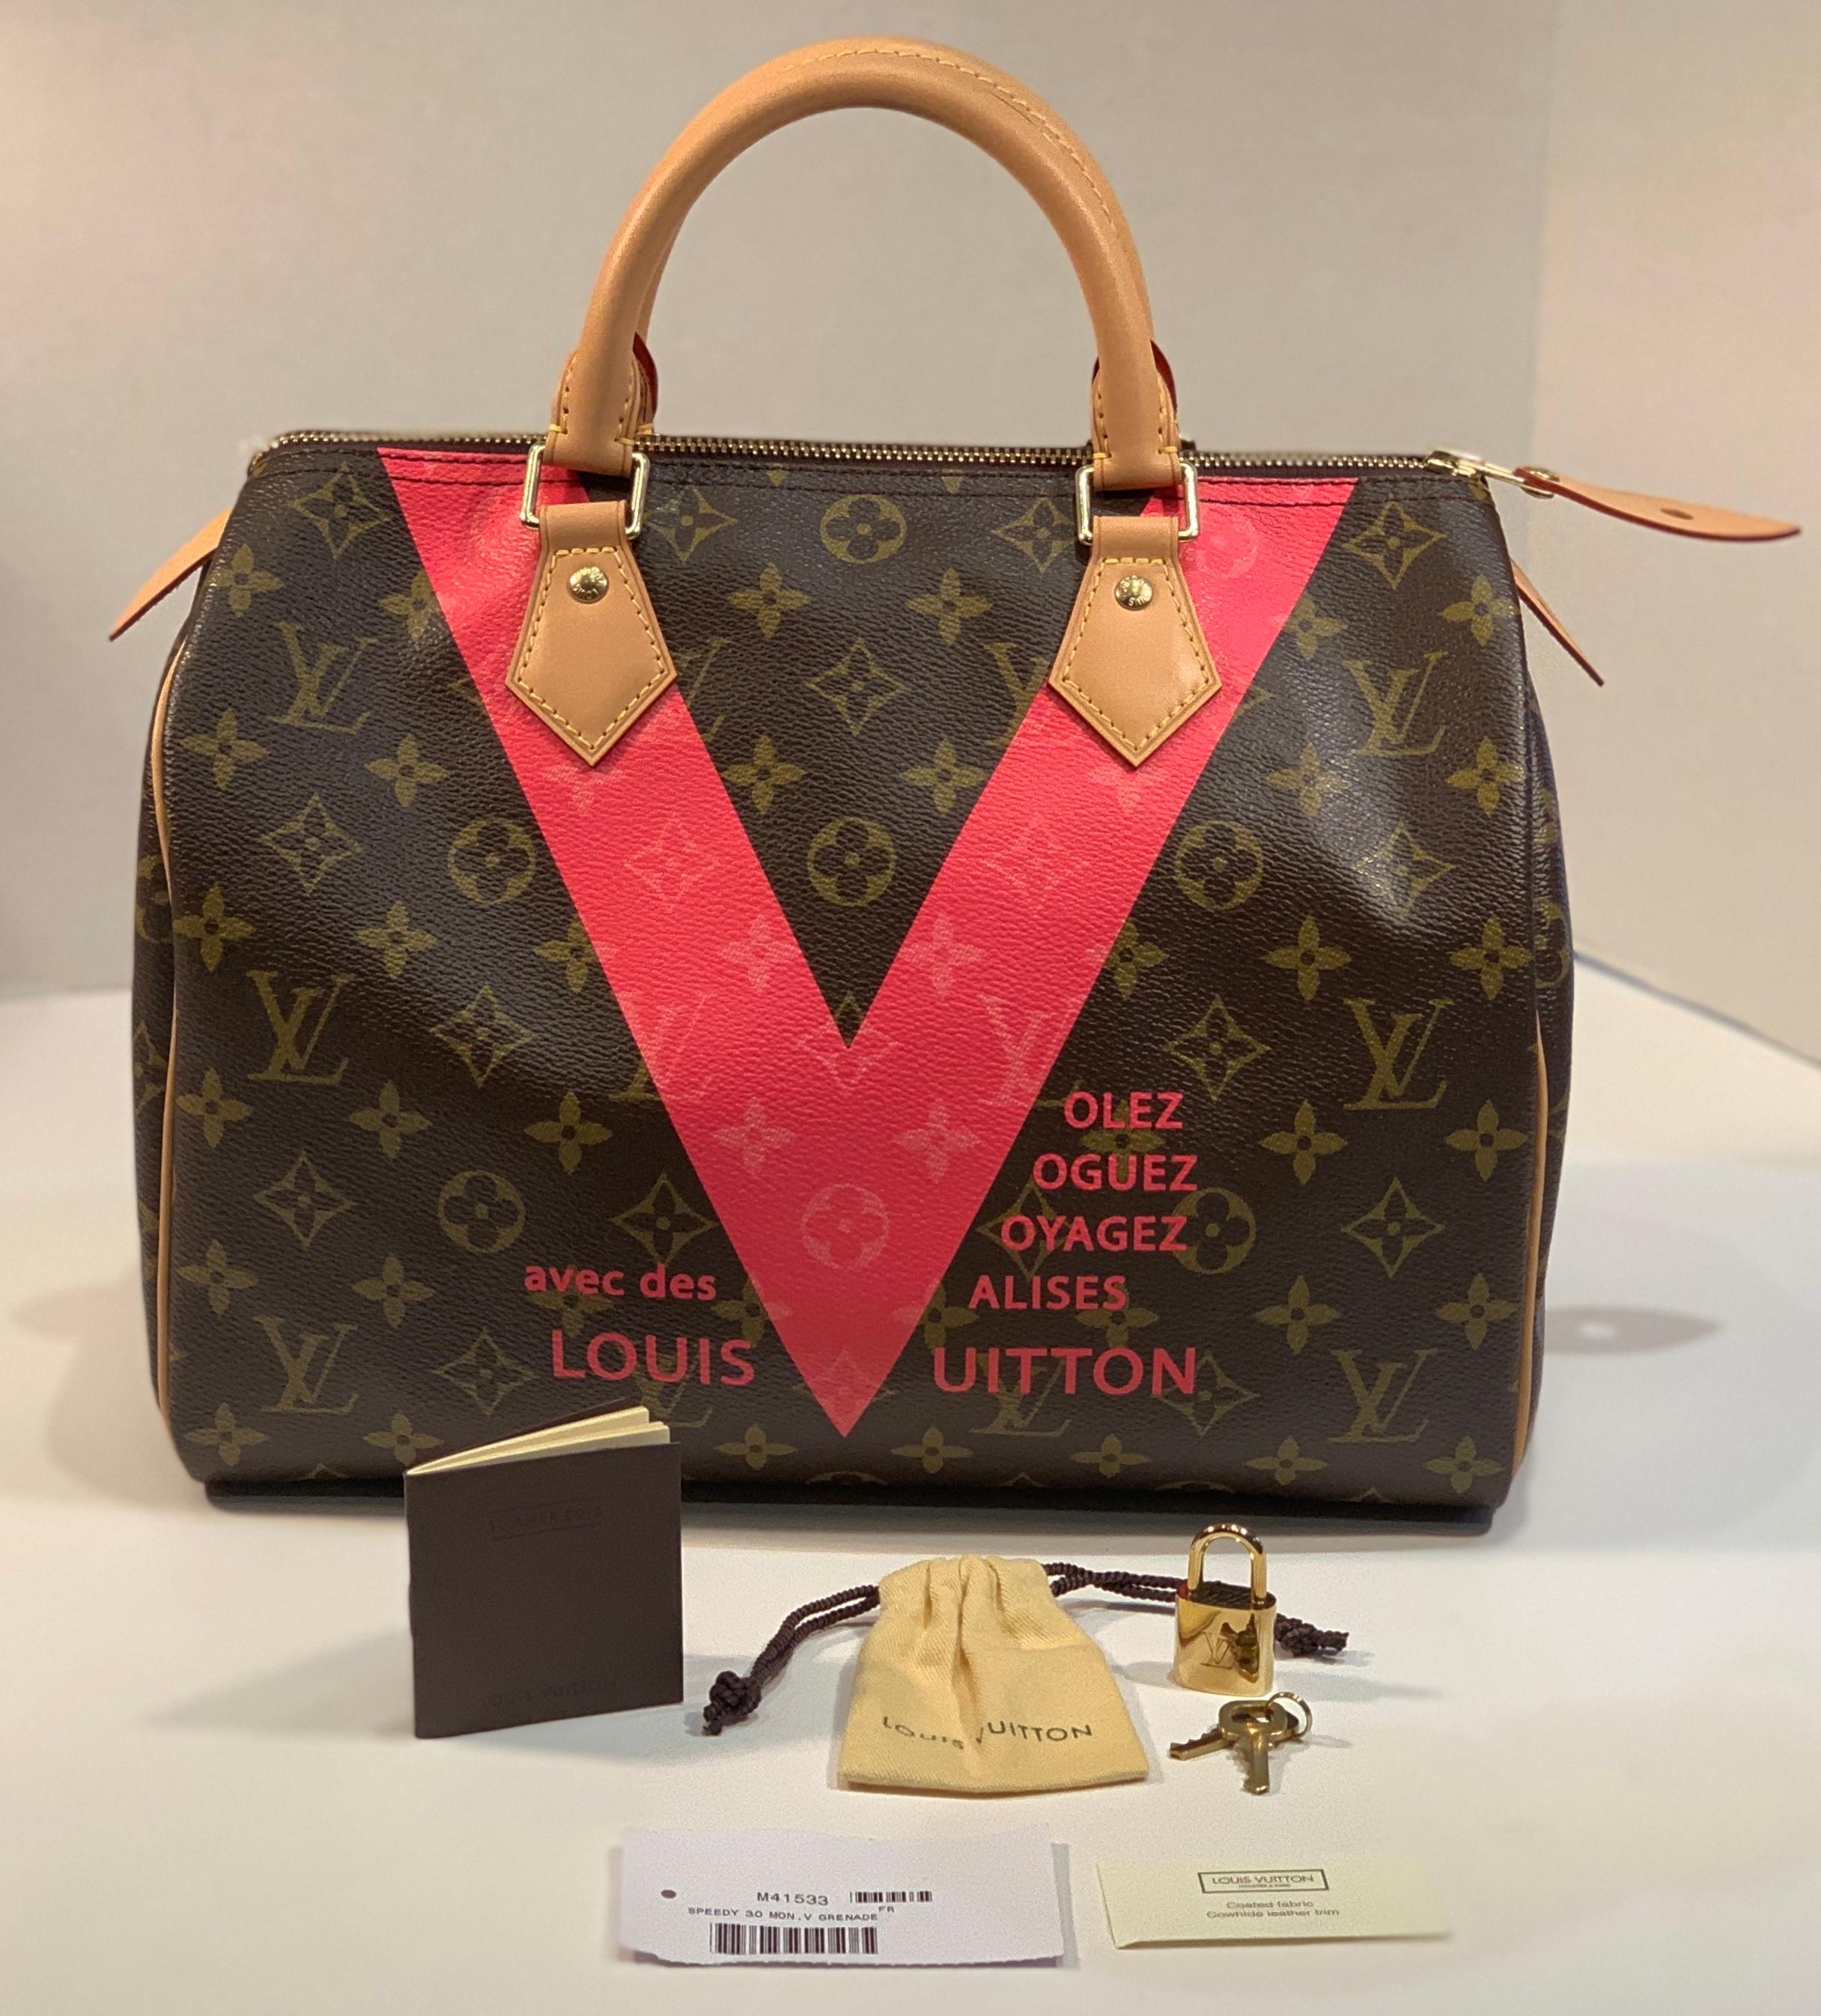 Stylish Louis Vuitton Speedy 30 limited edition purse with grenade pink “V” on iconic brown Monogram canvas from the 2015 Spring/Summer collection was inspired by the famous Louis Vuitton 